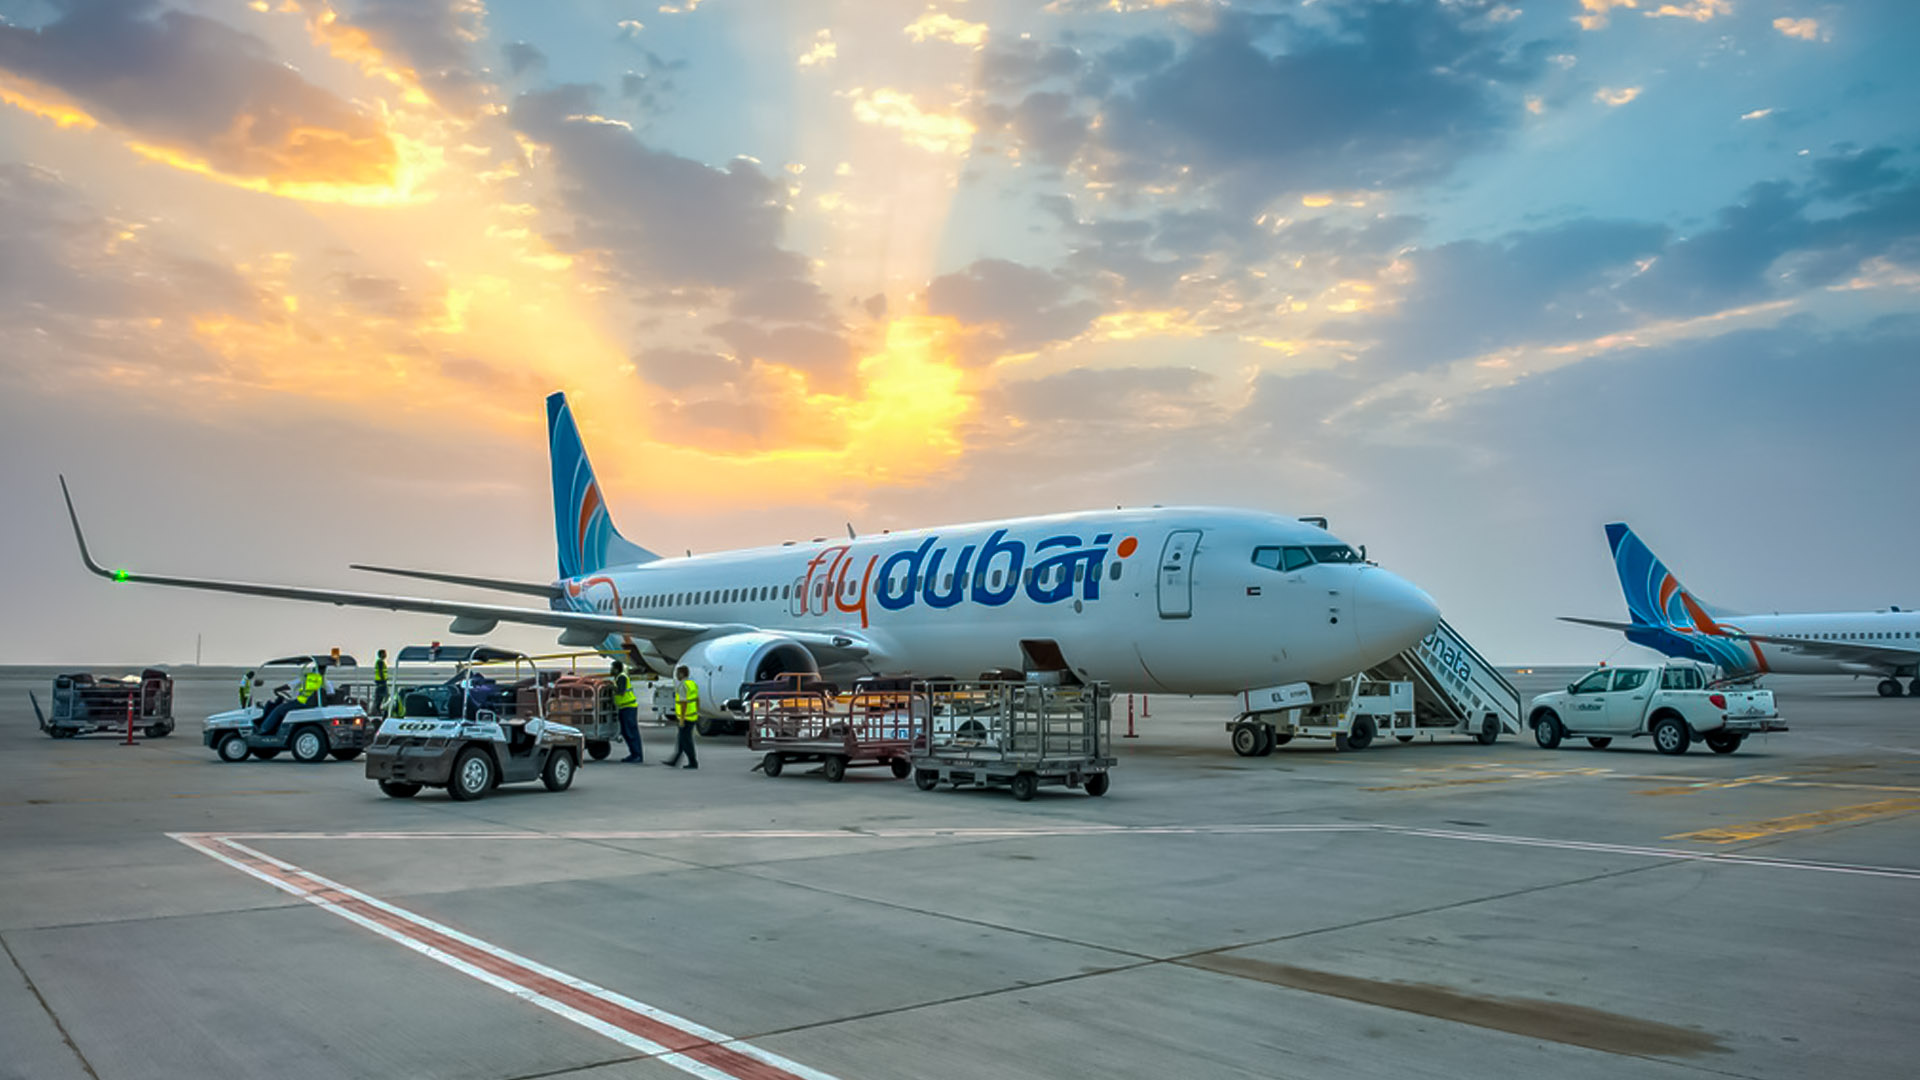 Flydubai to operate flights from Dubai World Central starting 9 May